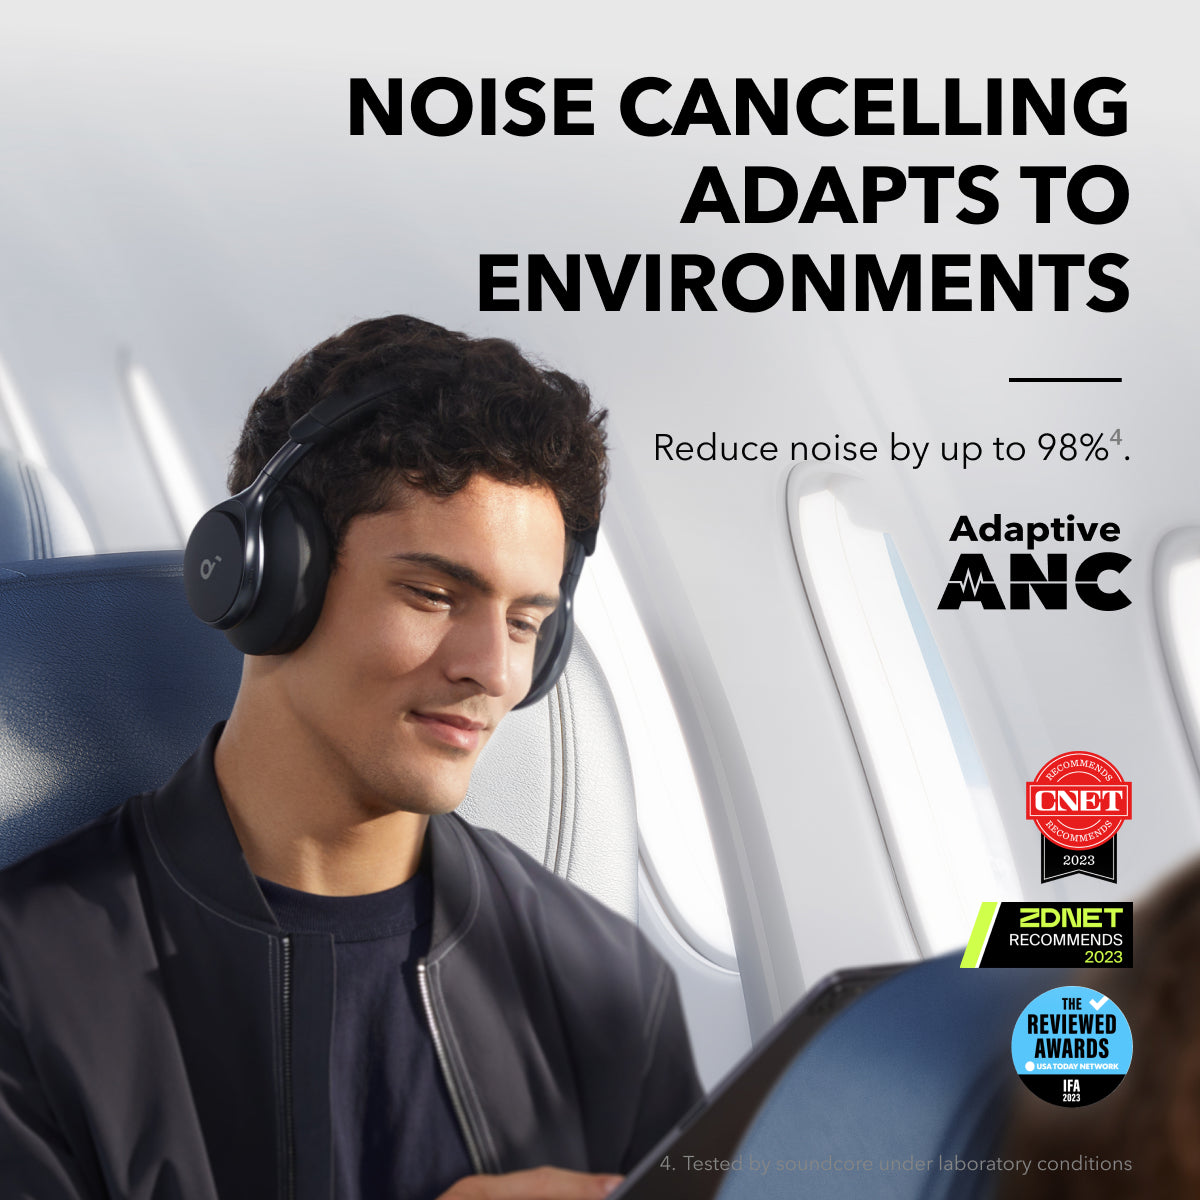 soundcore by Anker Q20i Hybrid Active Noise Cancelling Foldable Black